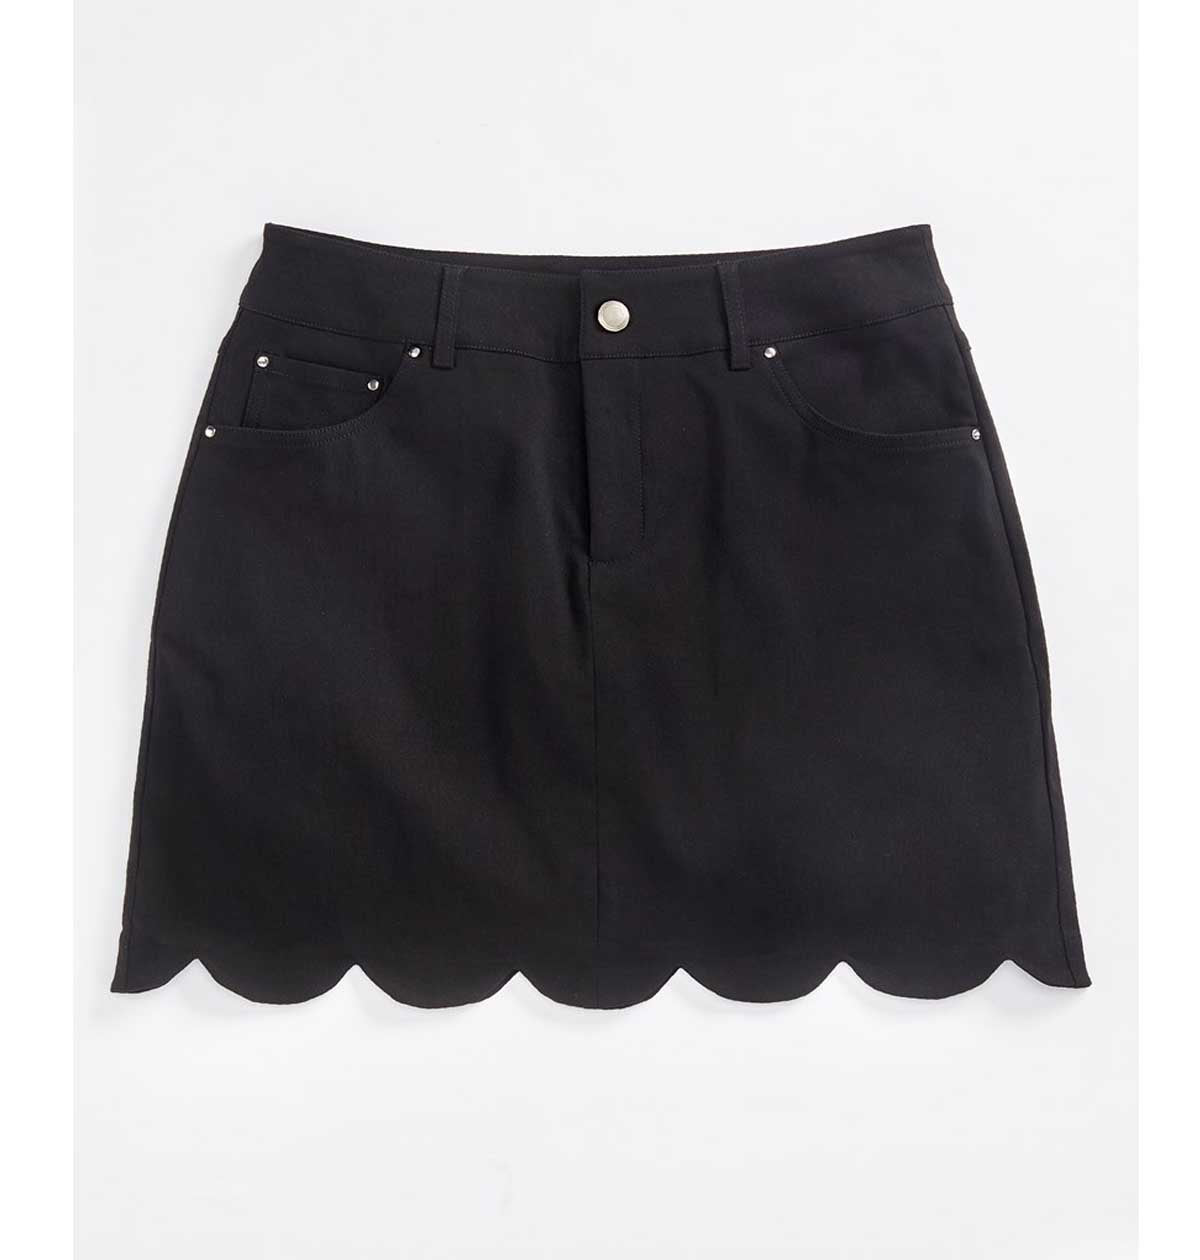 Charlie Paige Scallop Edge Skirt with Hidden Shorts, Size Large